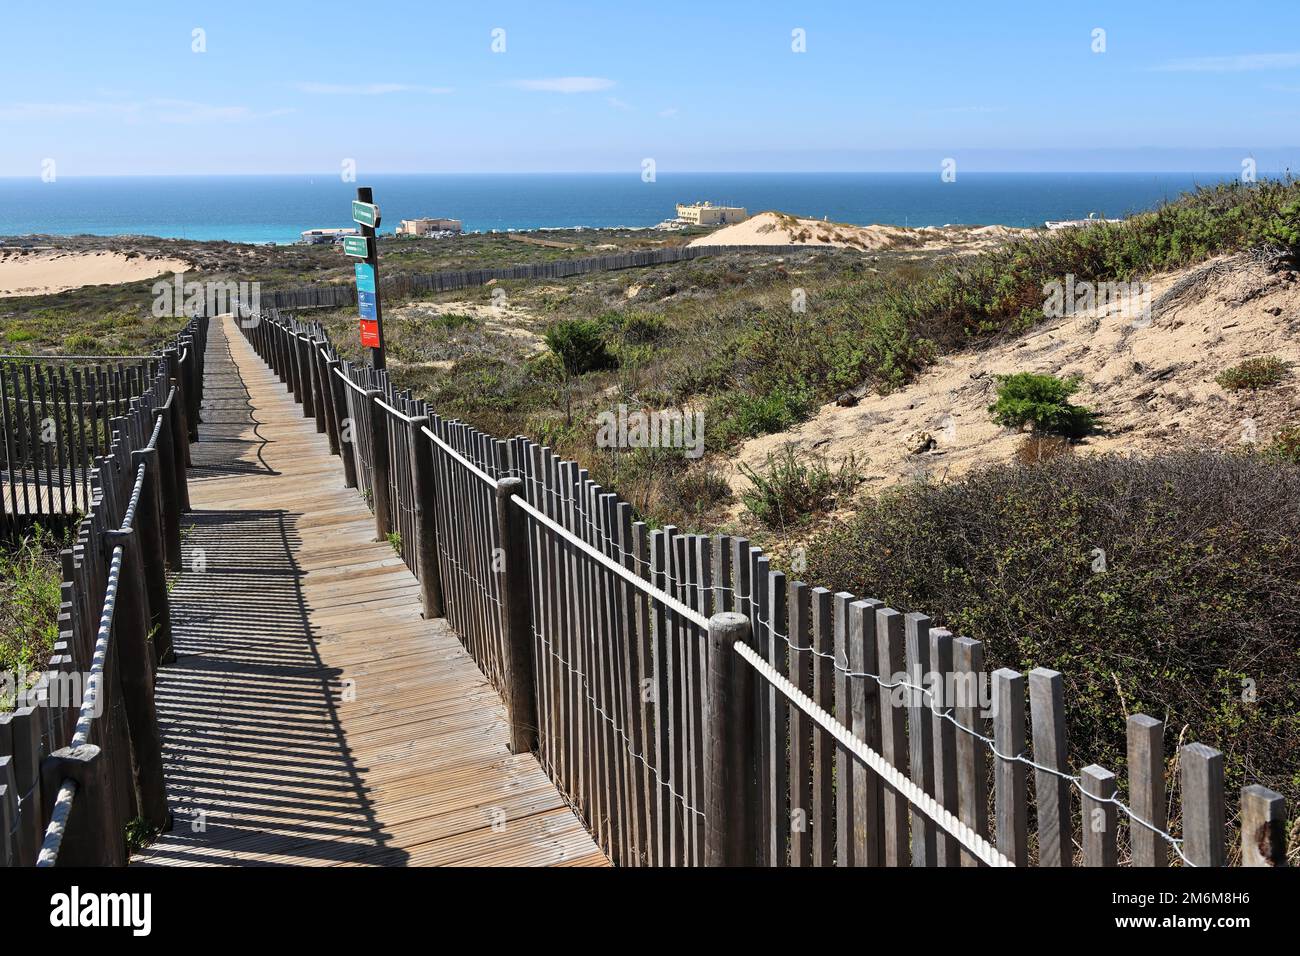 A boardwalk in the Cresmina dunes in Cascais, Portugal Stock Photo